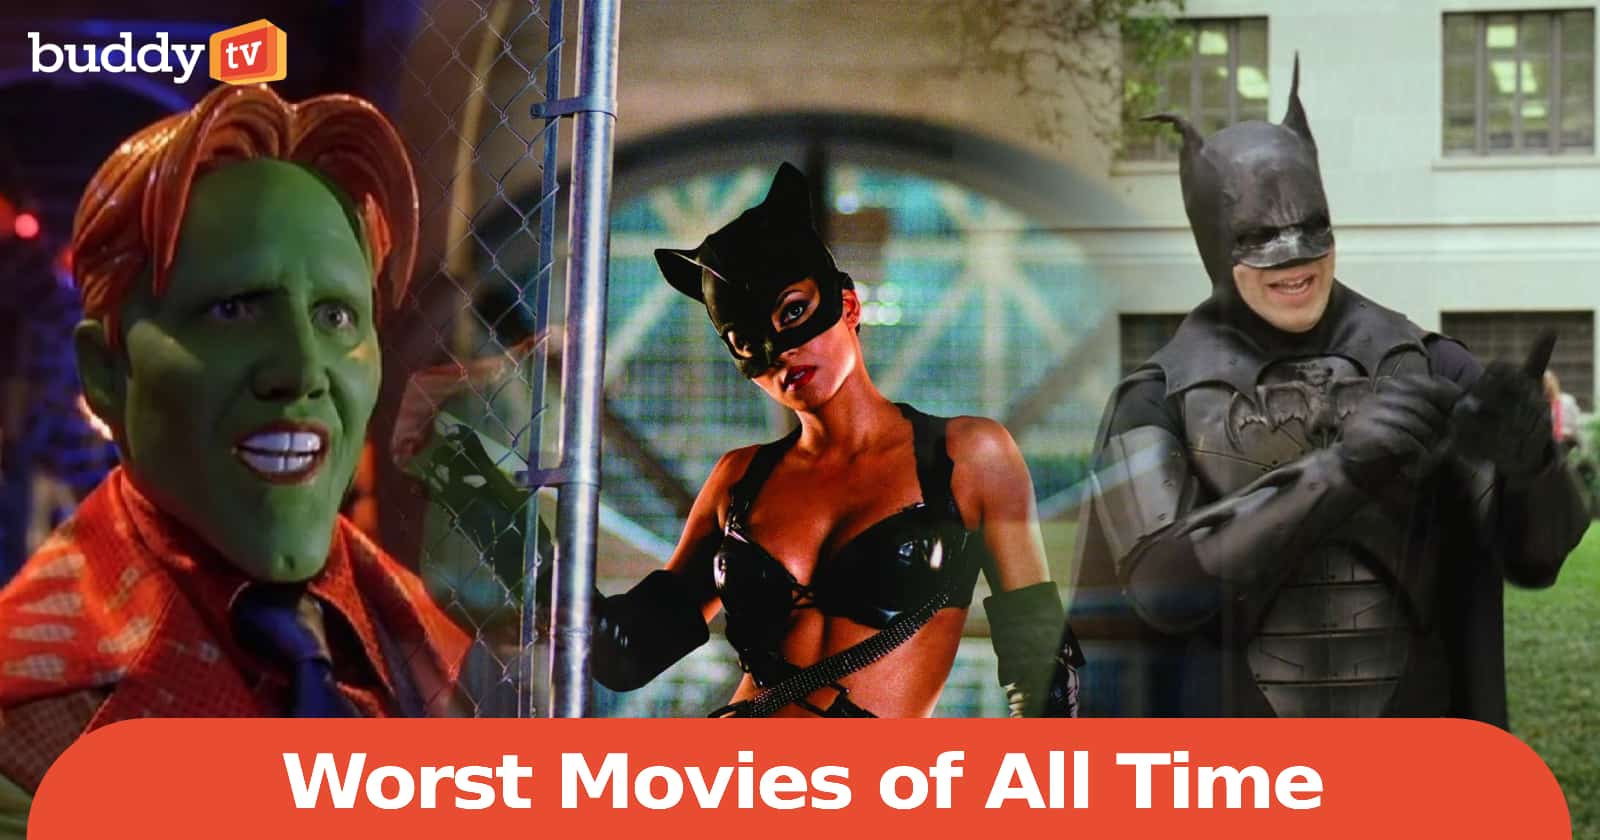 10 Worst Movies of All Time, Ranked by Viewers